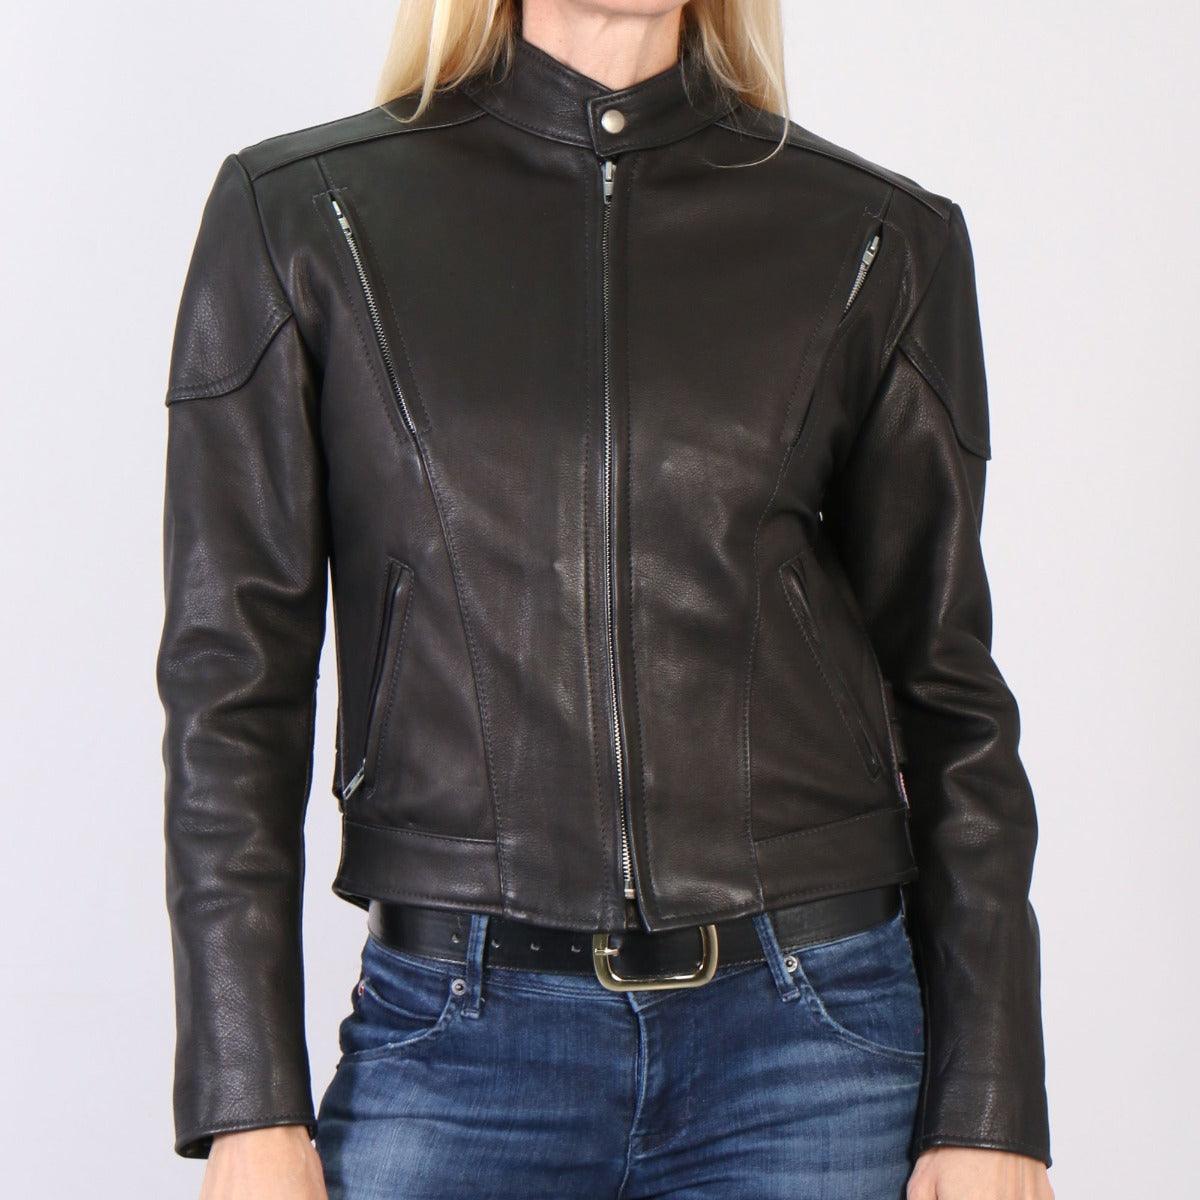 Hot Leathers Usa Made Women's Vented Leather Jacket - American Legend Rider